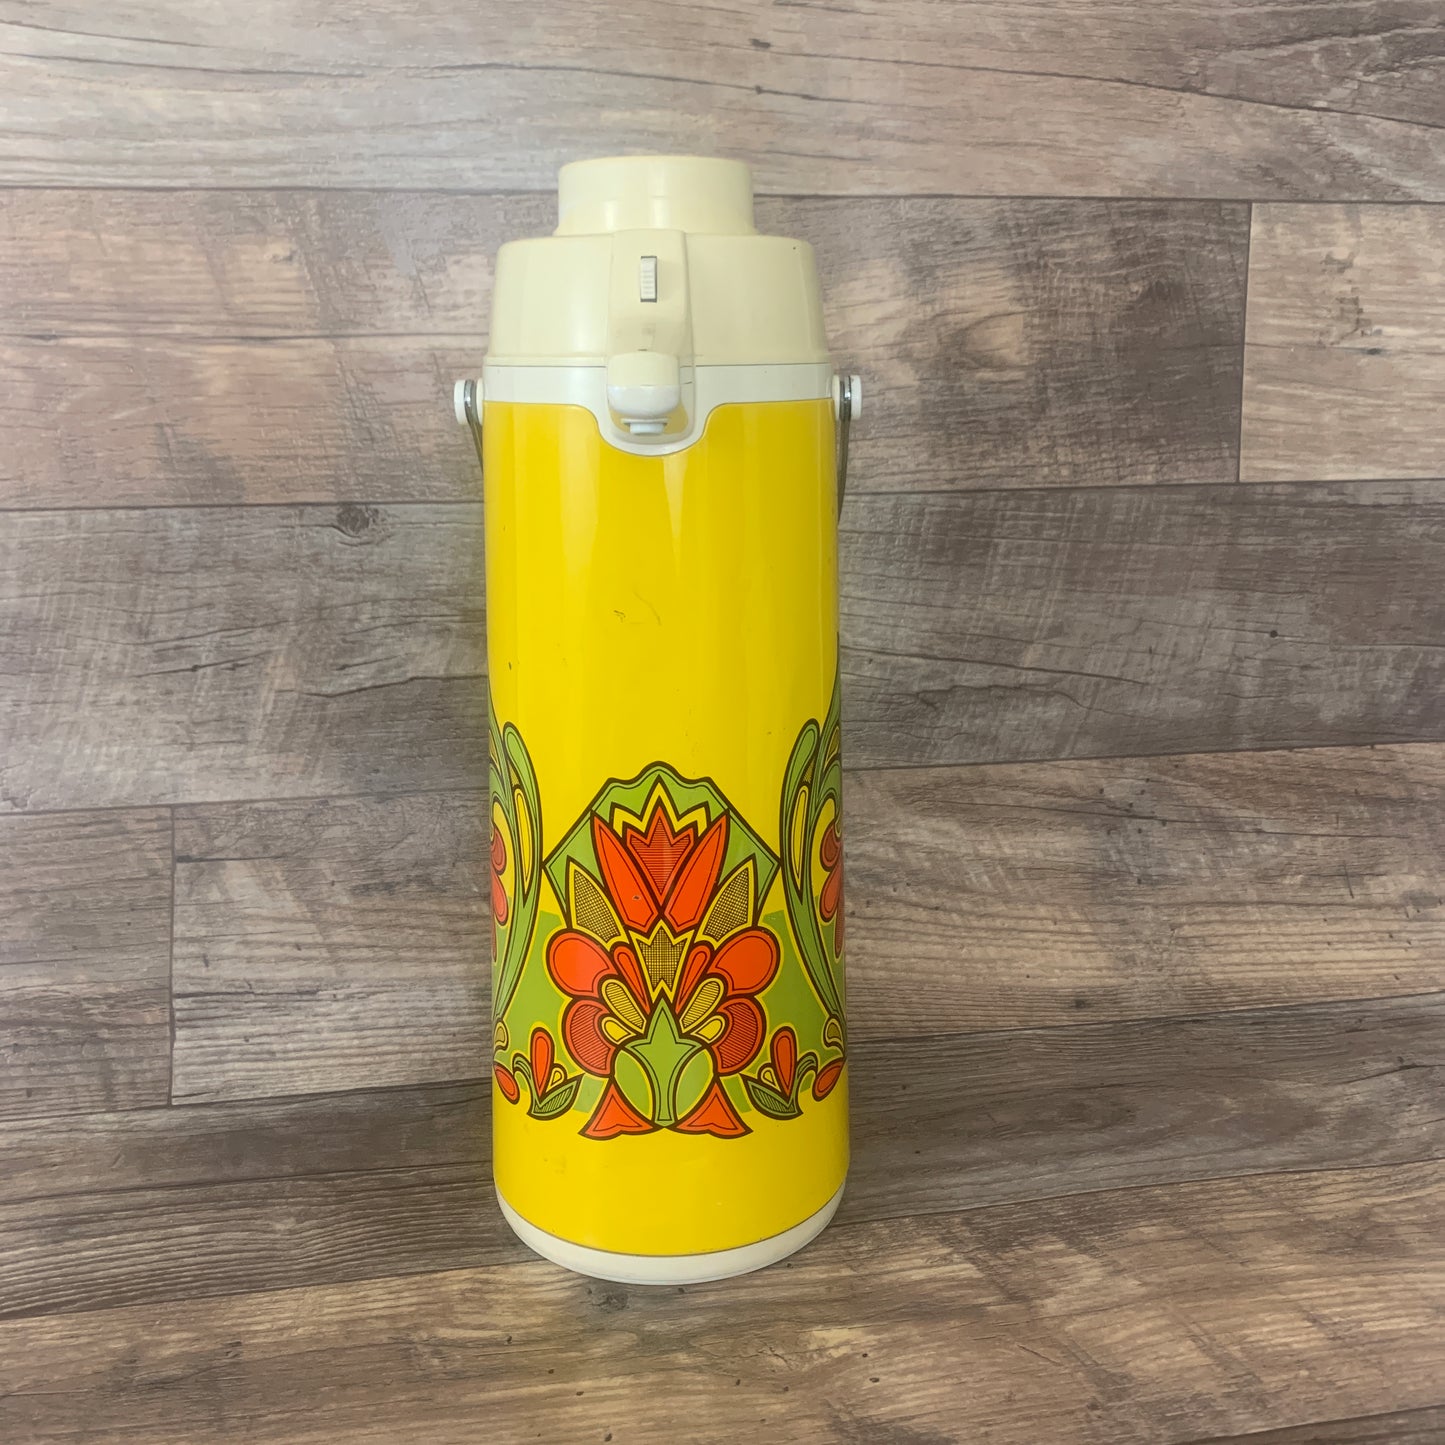 Vintage Insulated Thermos  Mid Century Coffee Server Vintage  Insulated Carafe Vintage 70s Psychedelic Pattern